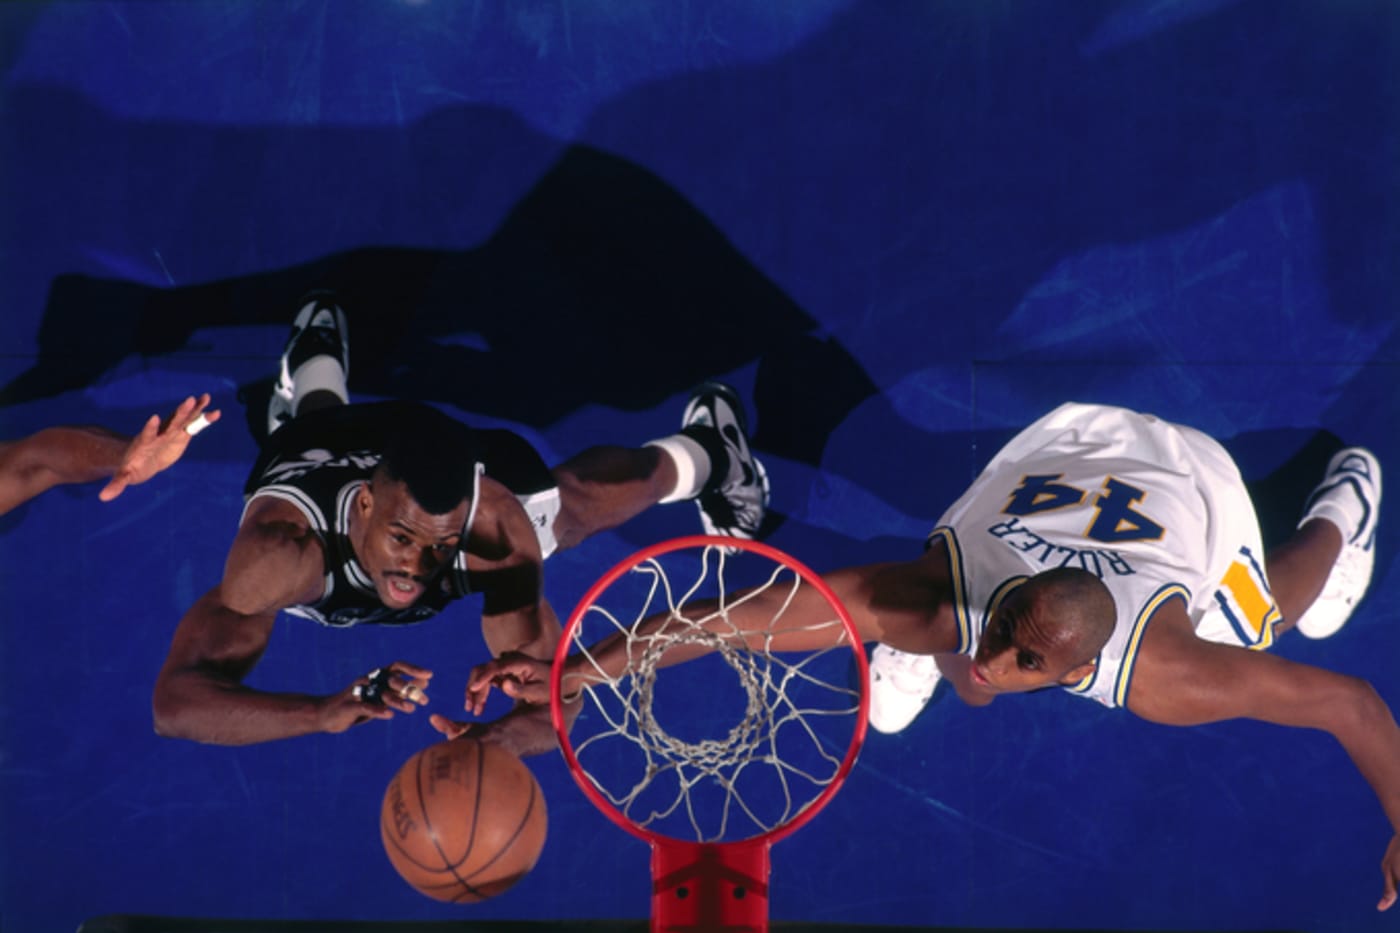 David Robinson of the San Antonio Spurs and Clifford Rozier of the Golden State Warriors circa 1996